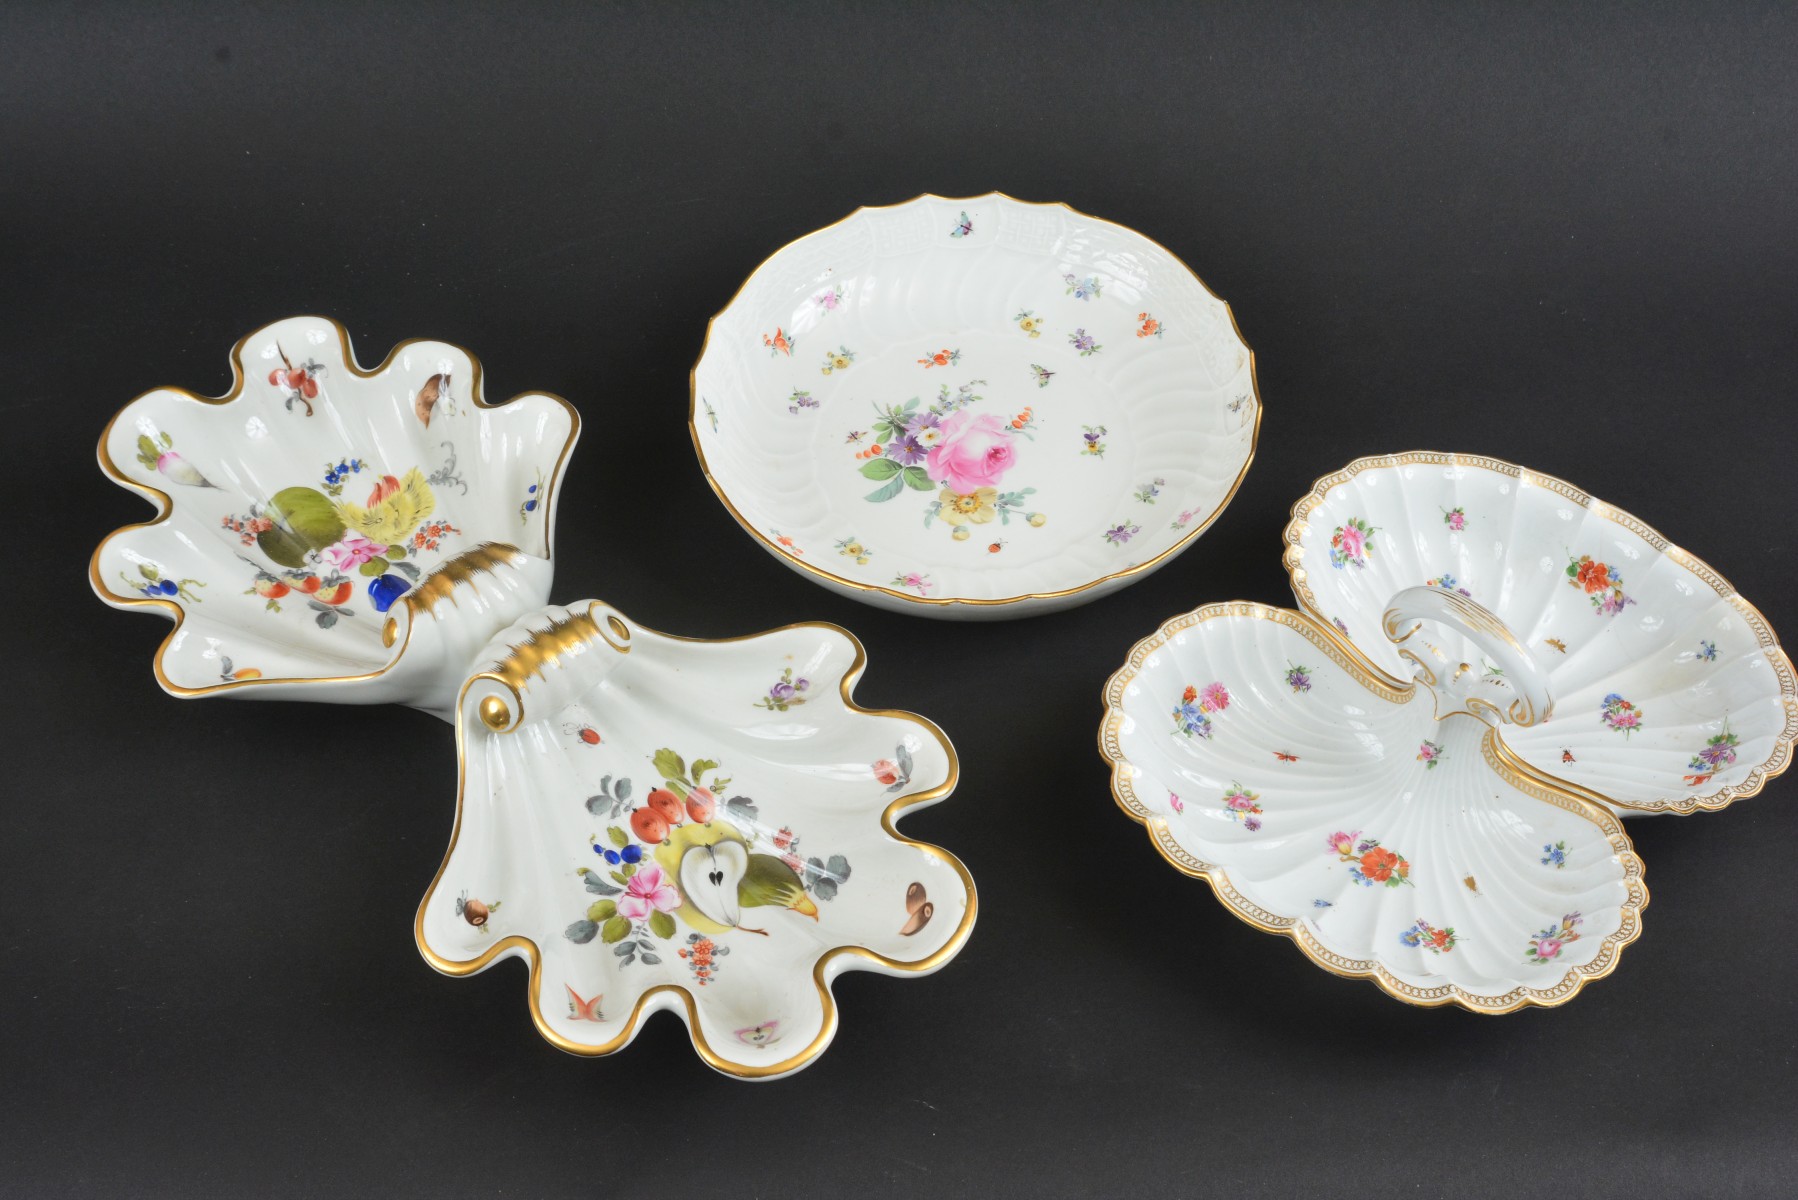 HEREND AND MEISSEN PORCELAIN SERVING PIECES